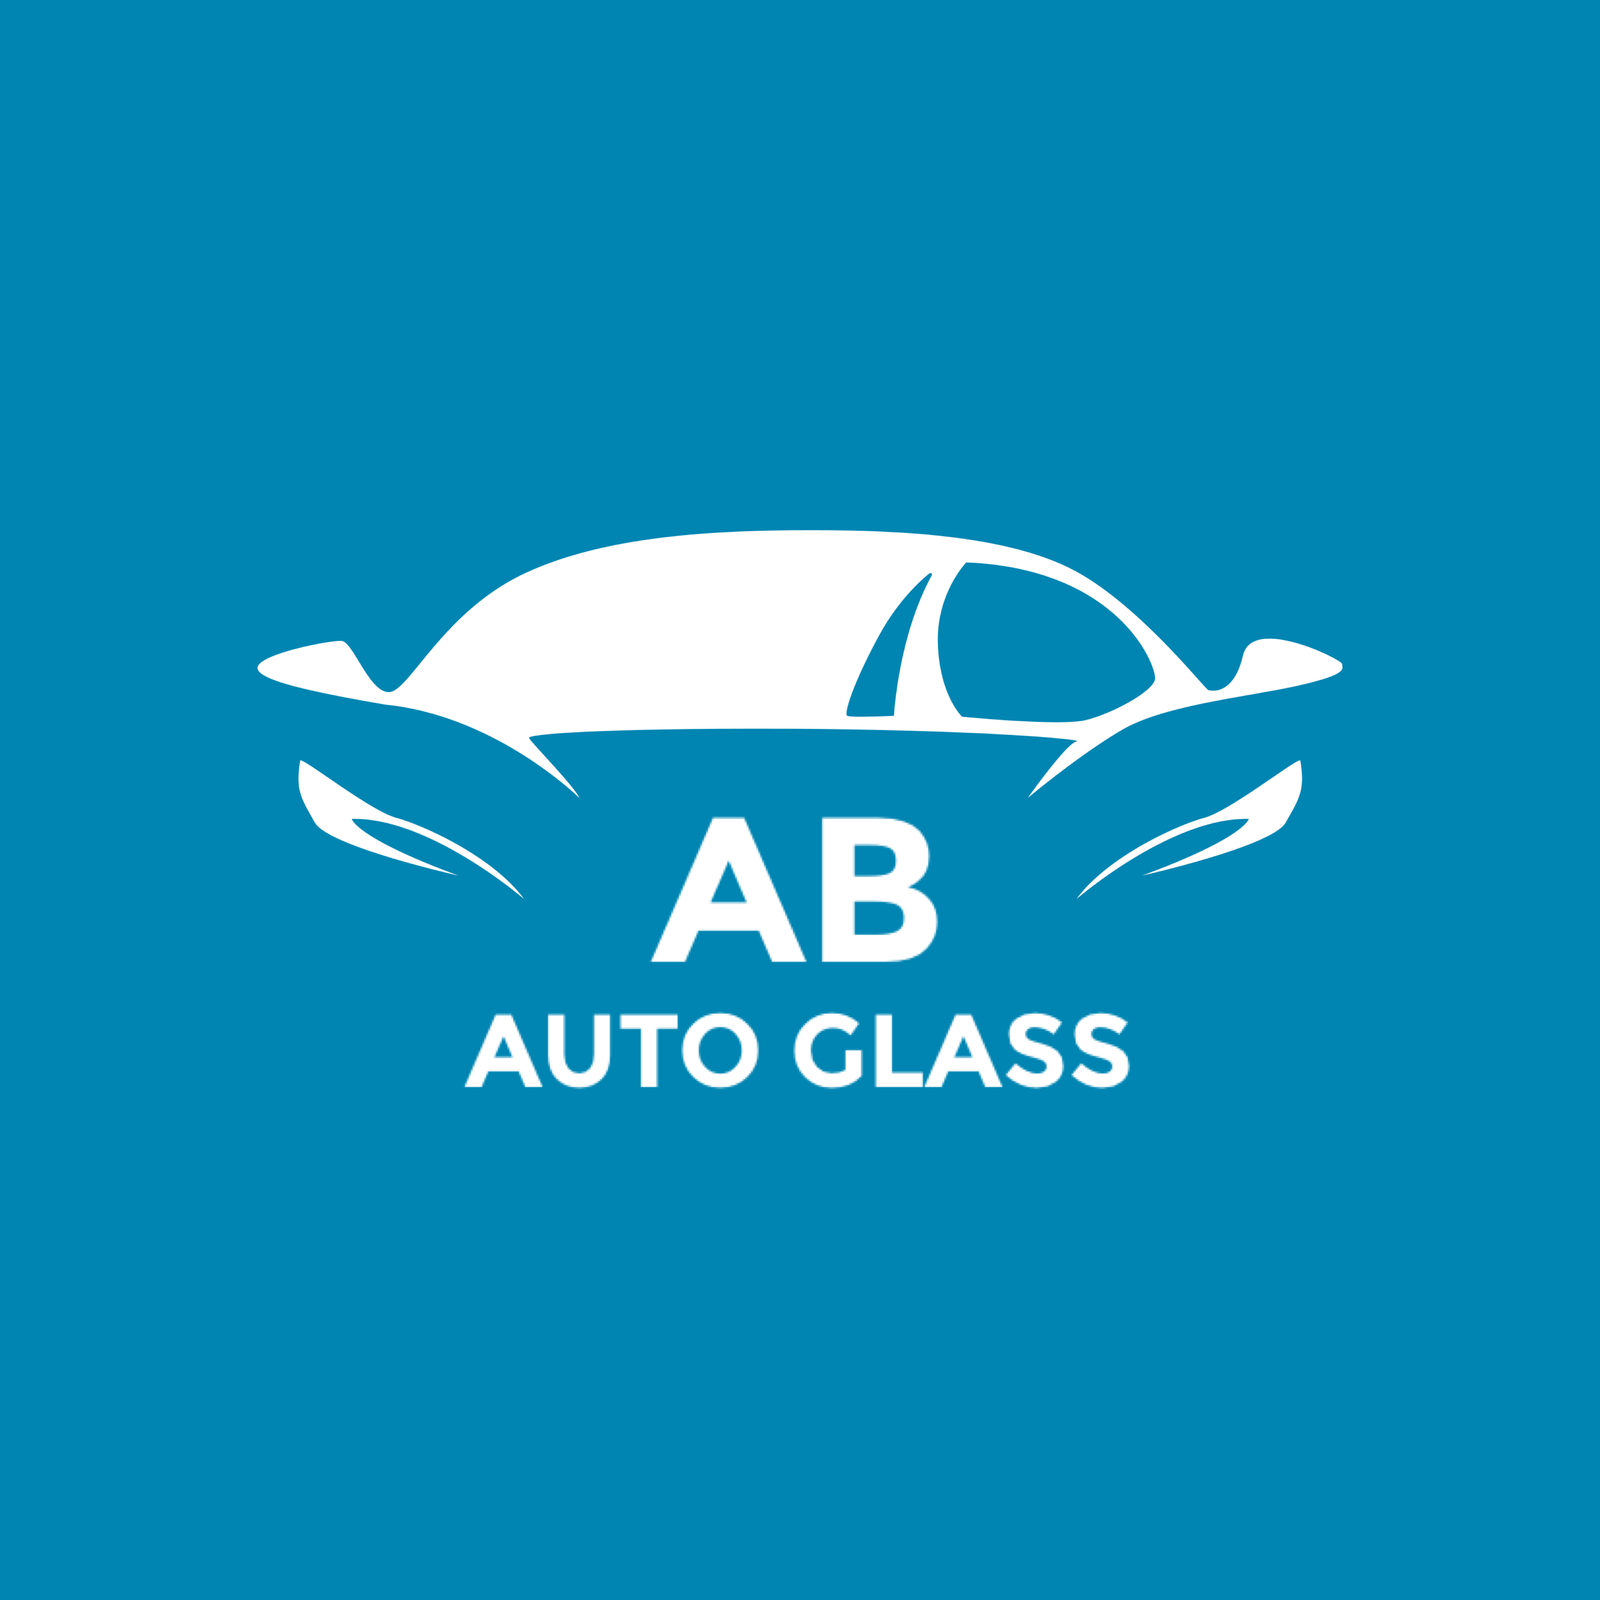 Mobile Auto Glass Repair & Windshield Services